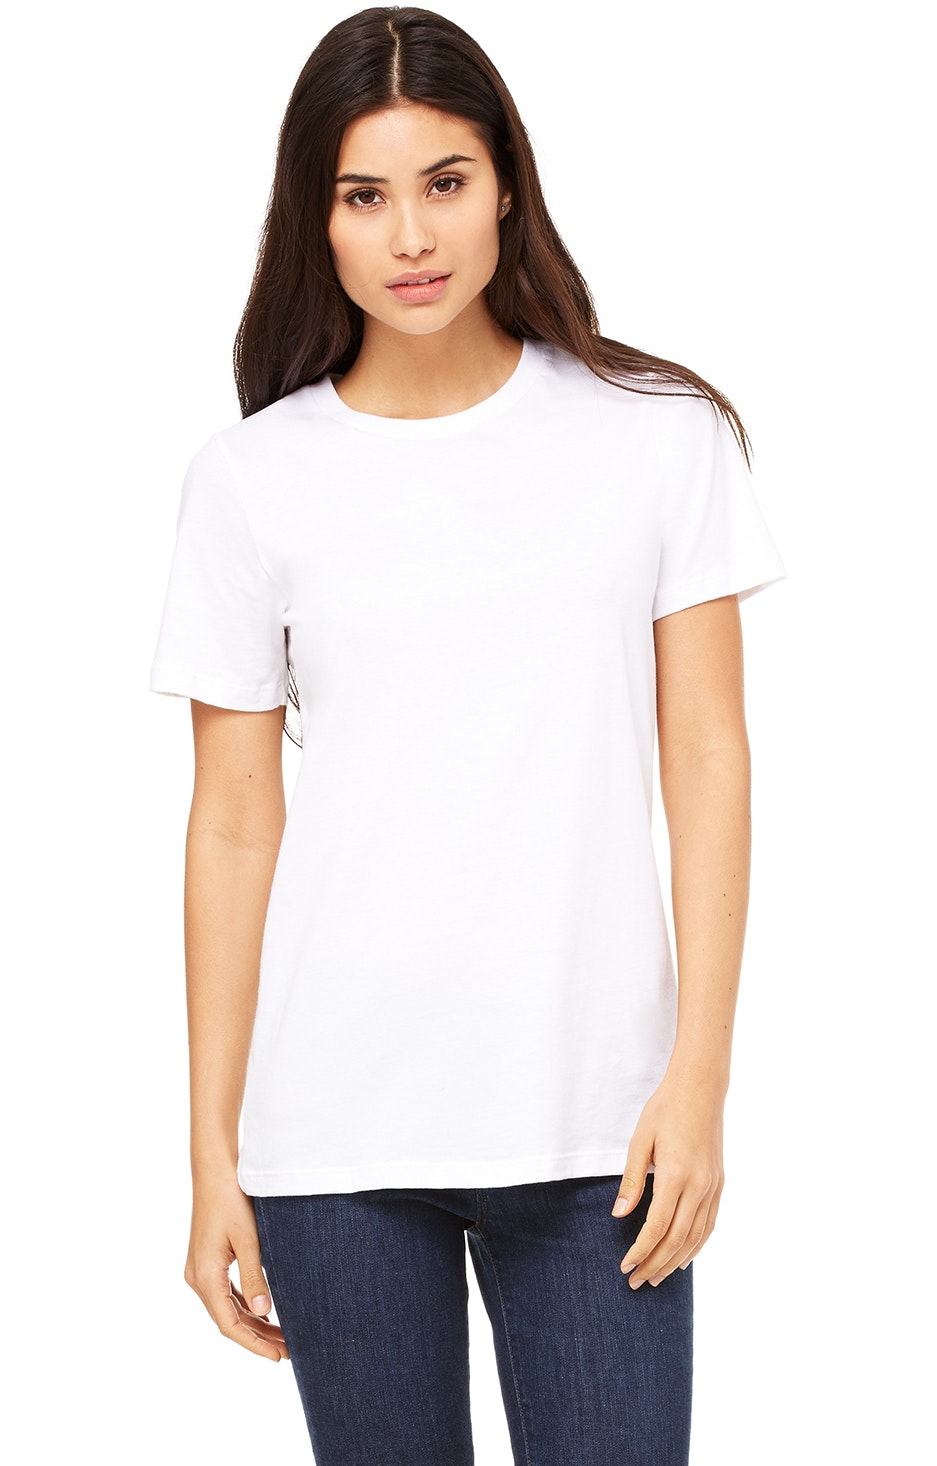 Bella Canvas B6400 Ladies' Relaxed Jersey Short-Sleeve T-Shirt ...